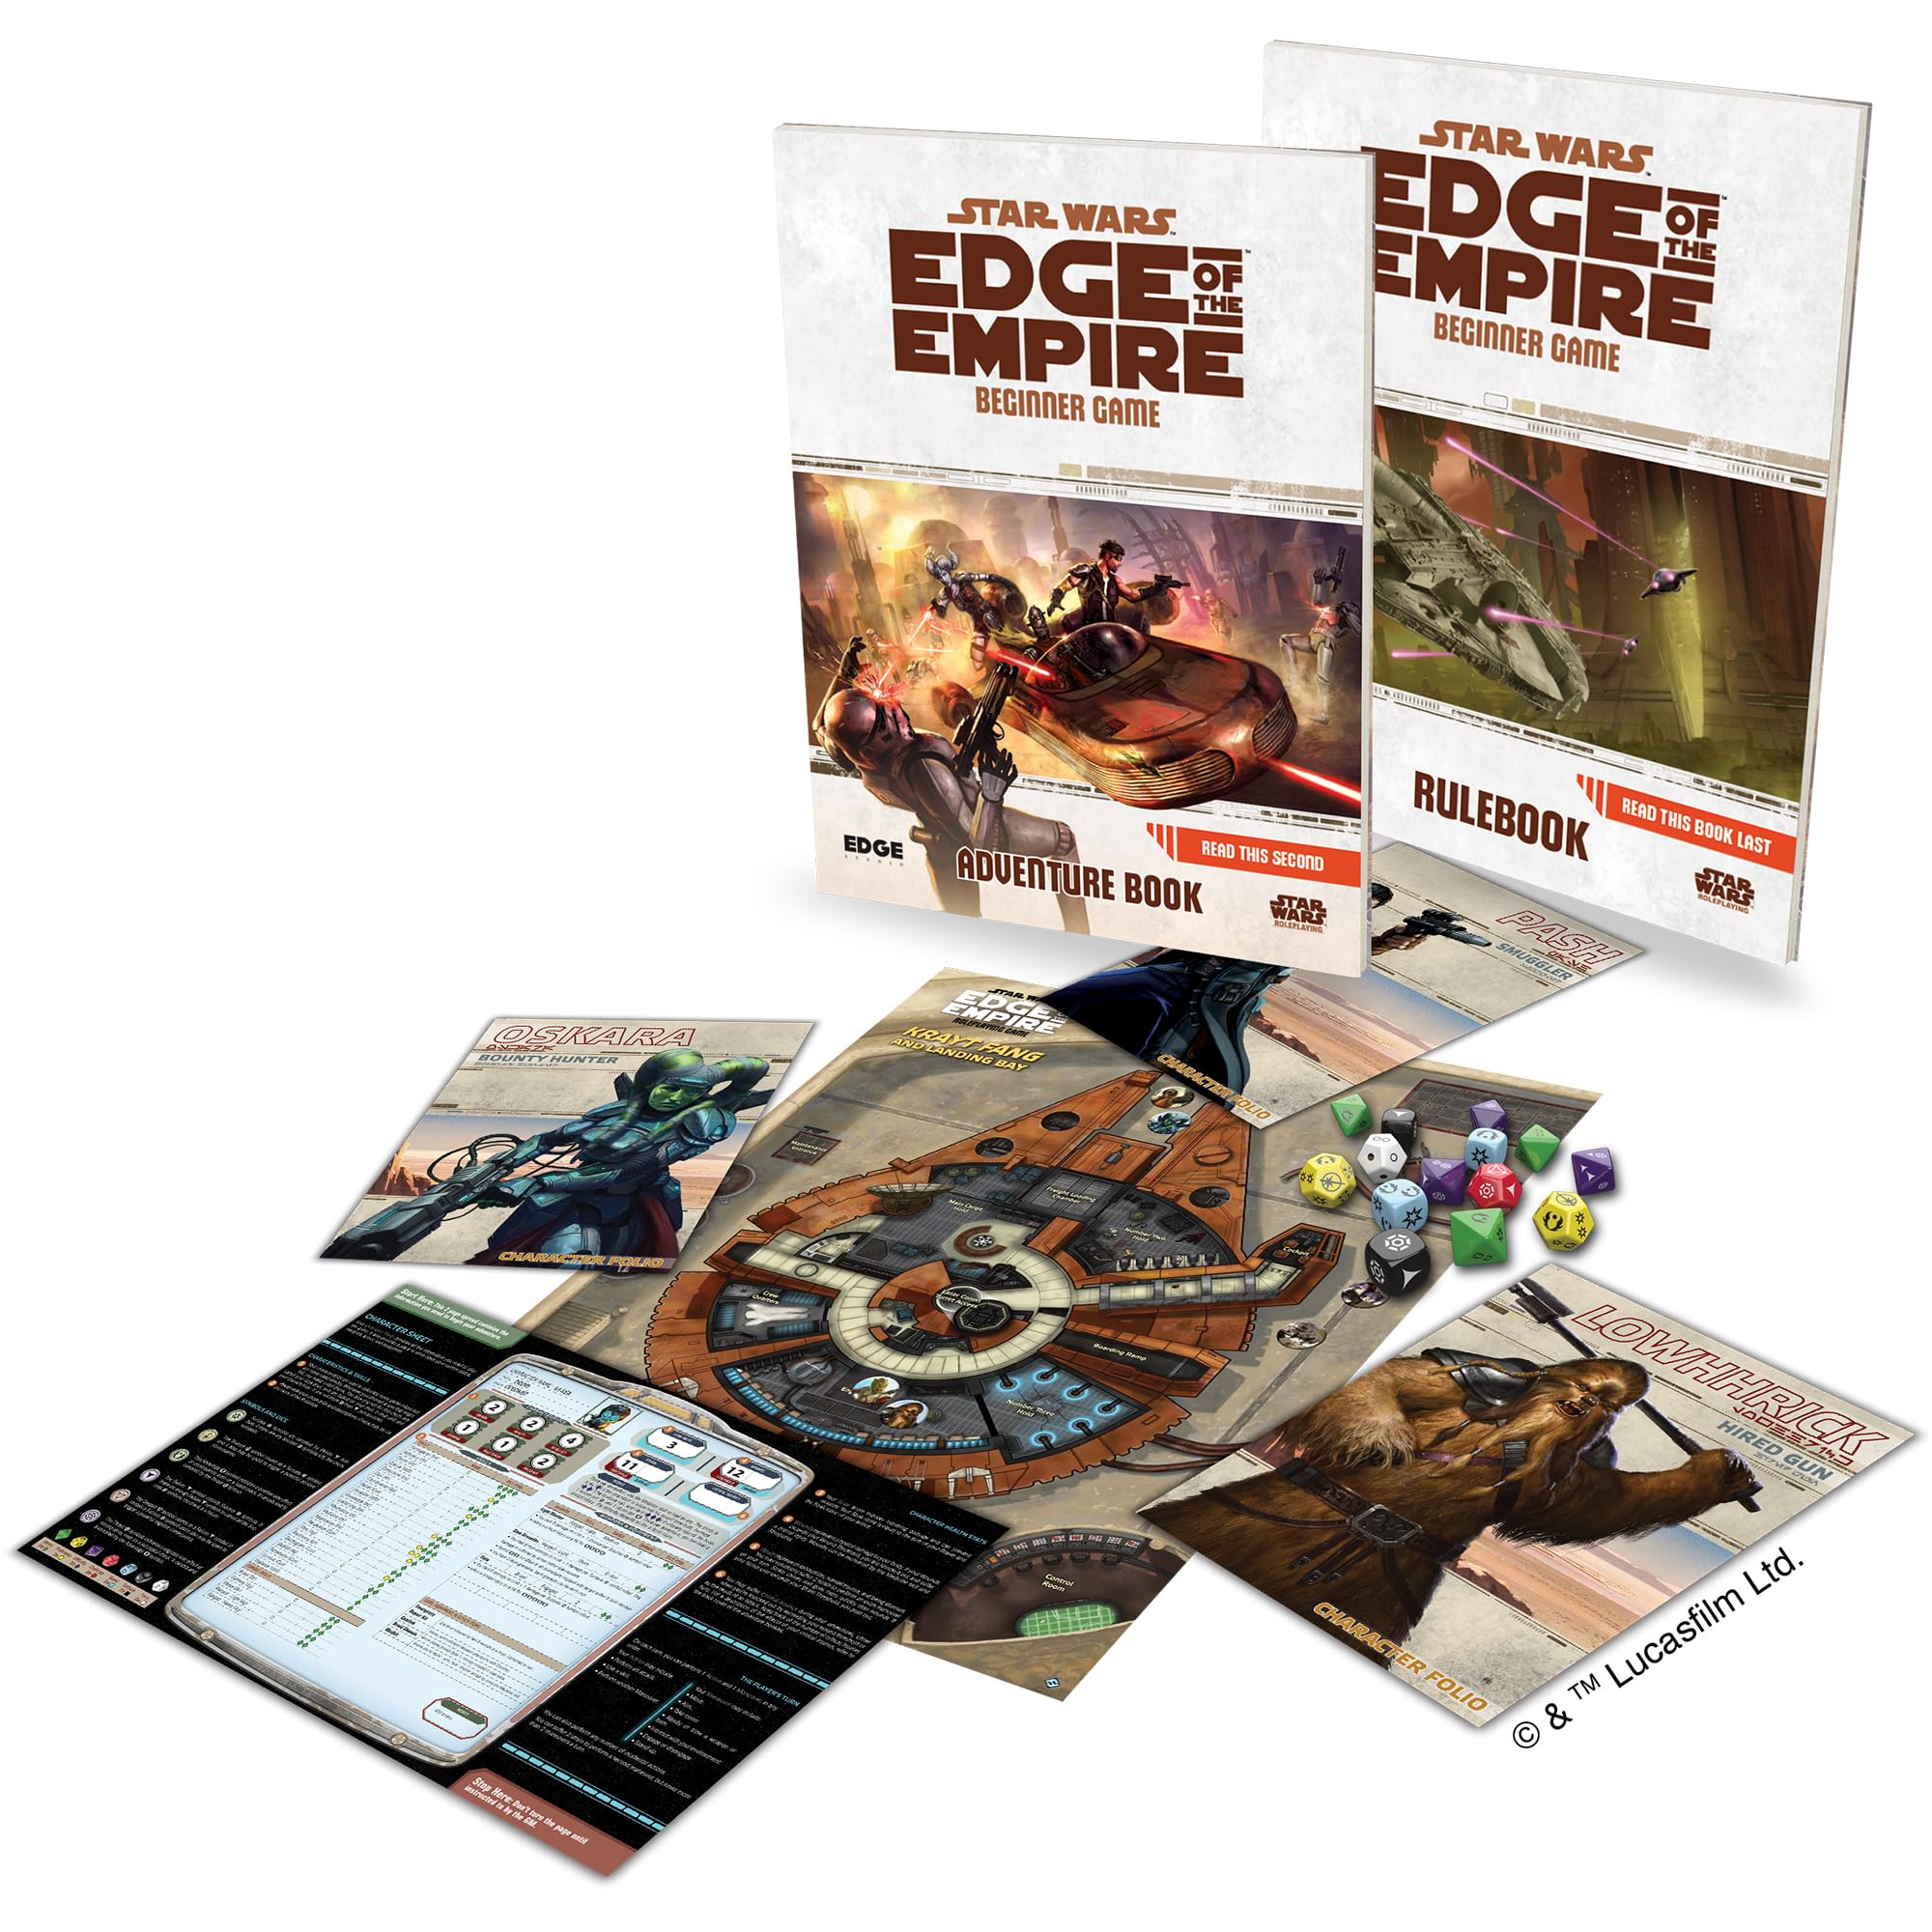 Star Wars - Edge of The Empire: Beginner Game - Embark on Galactic Adventures in a Complete Learn-As-You-Go Experience! Sci-Fi RPG, Ages 10+, 3-5 Players, 1 Hour Playtime, Made by EDGE Studio